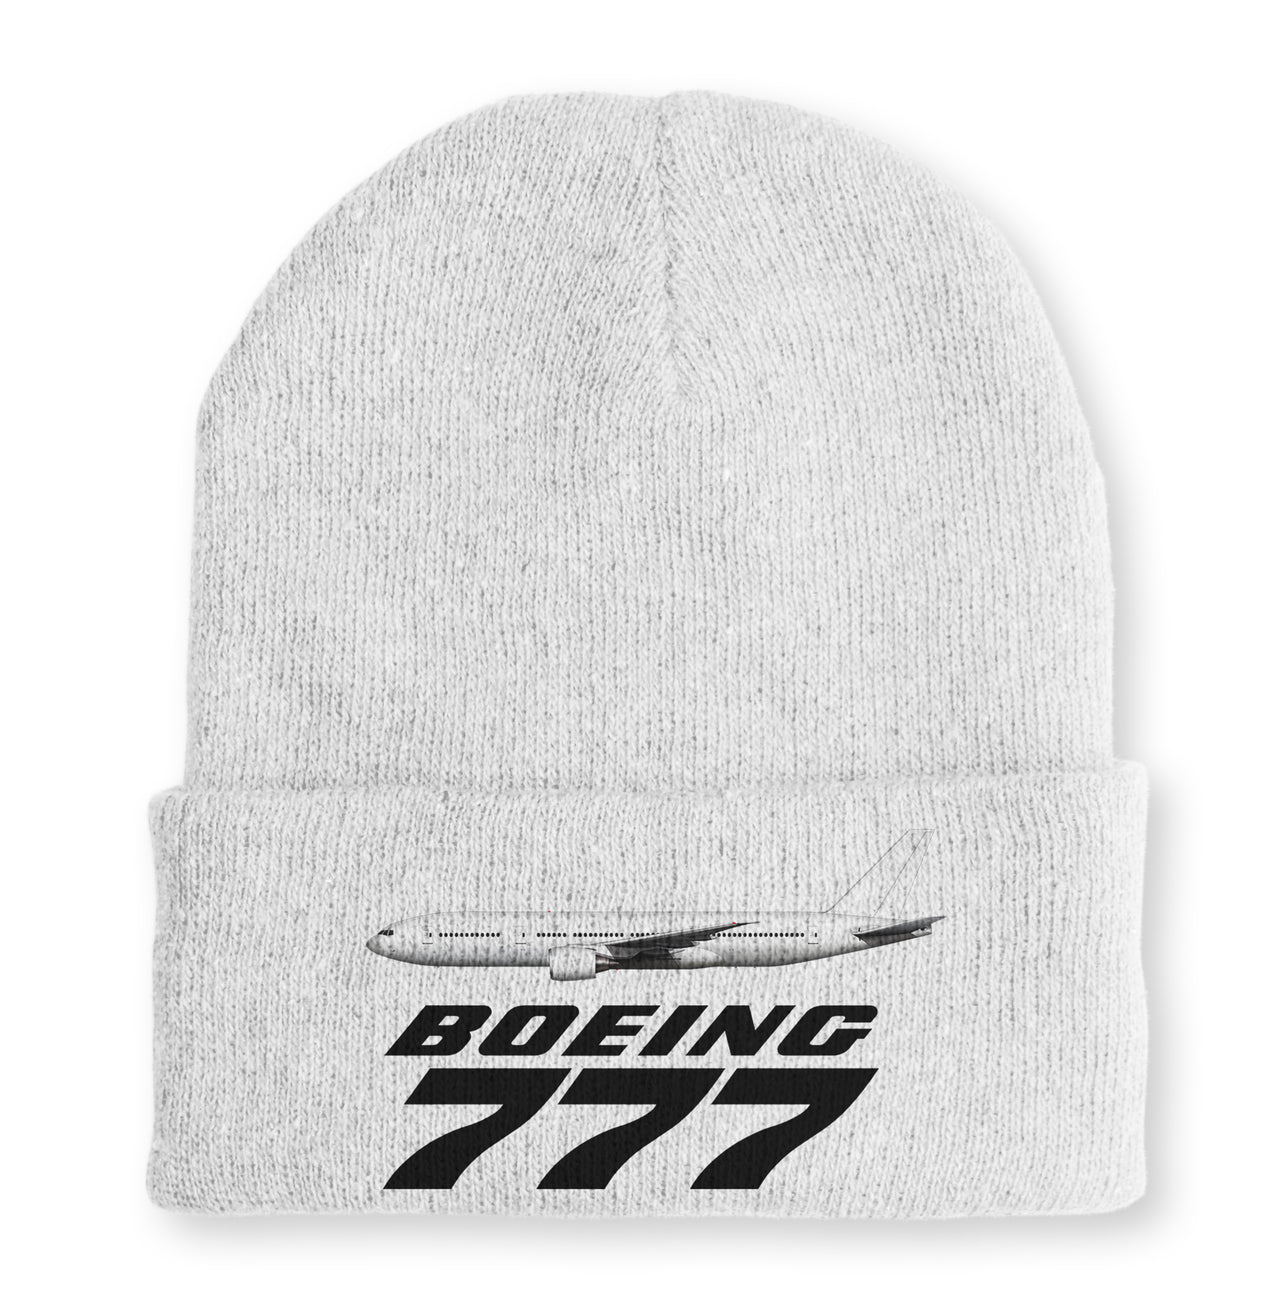 The Boeing 777 Embroidered Beanies